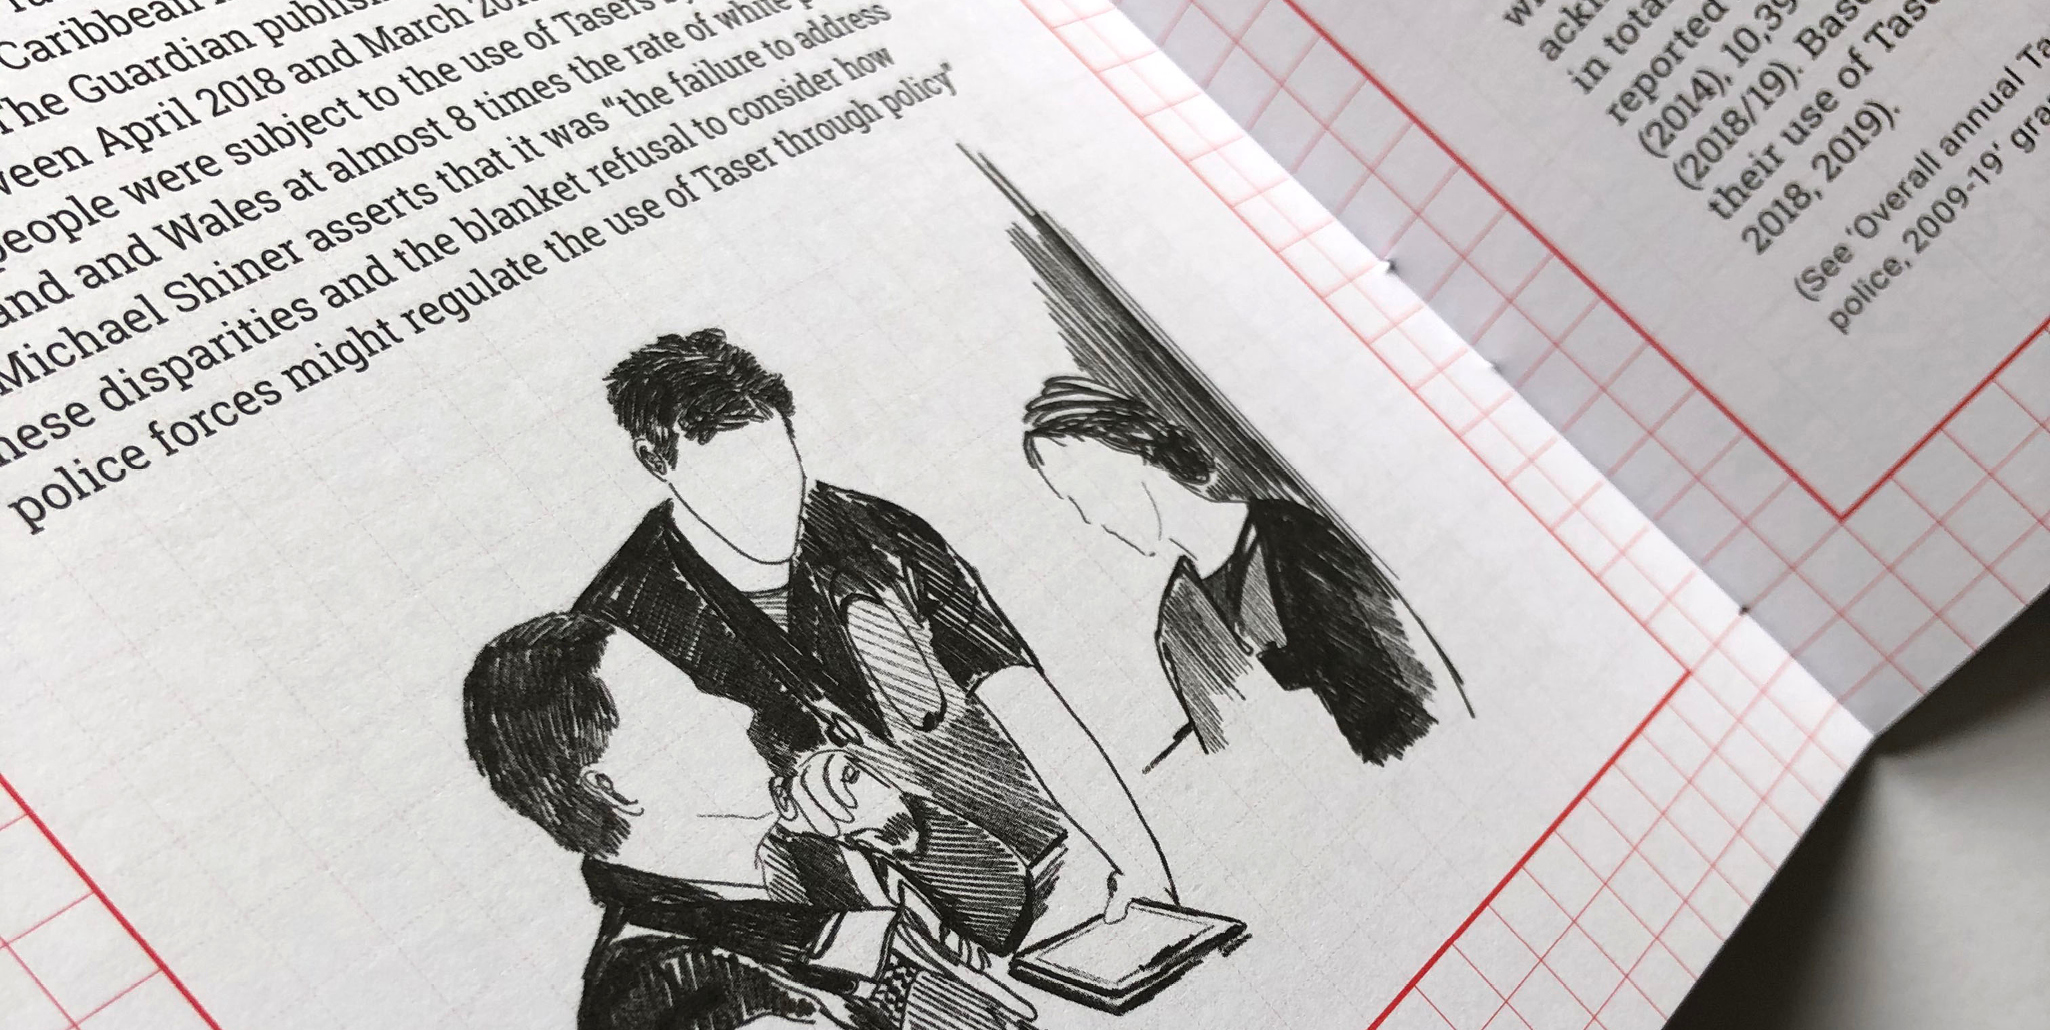 A spread showing a drawing of a police interview